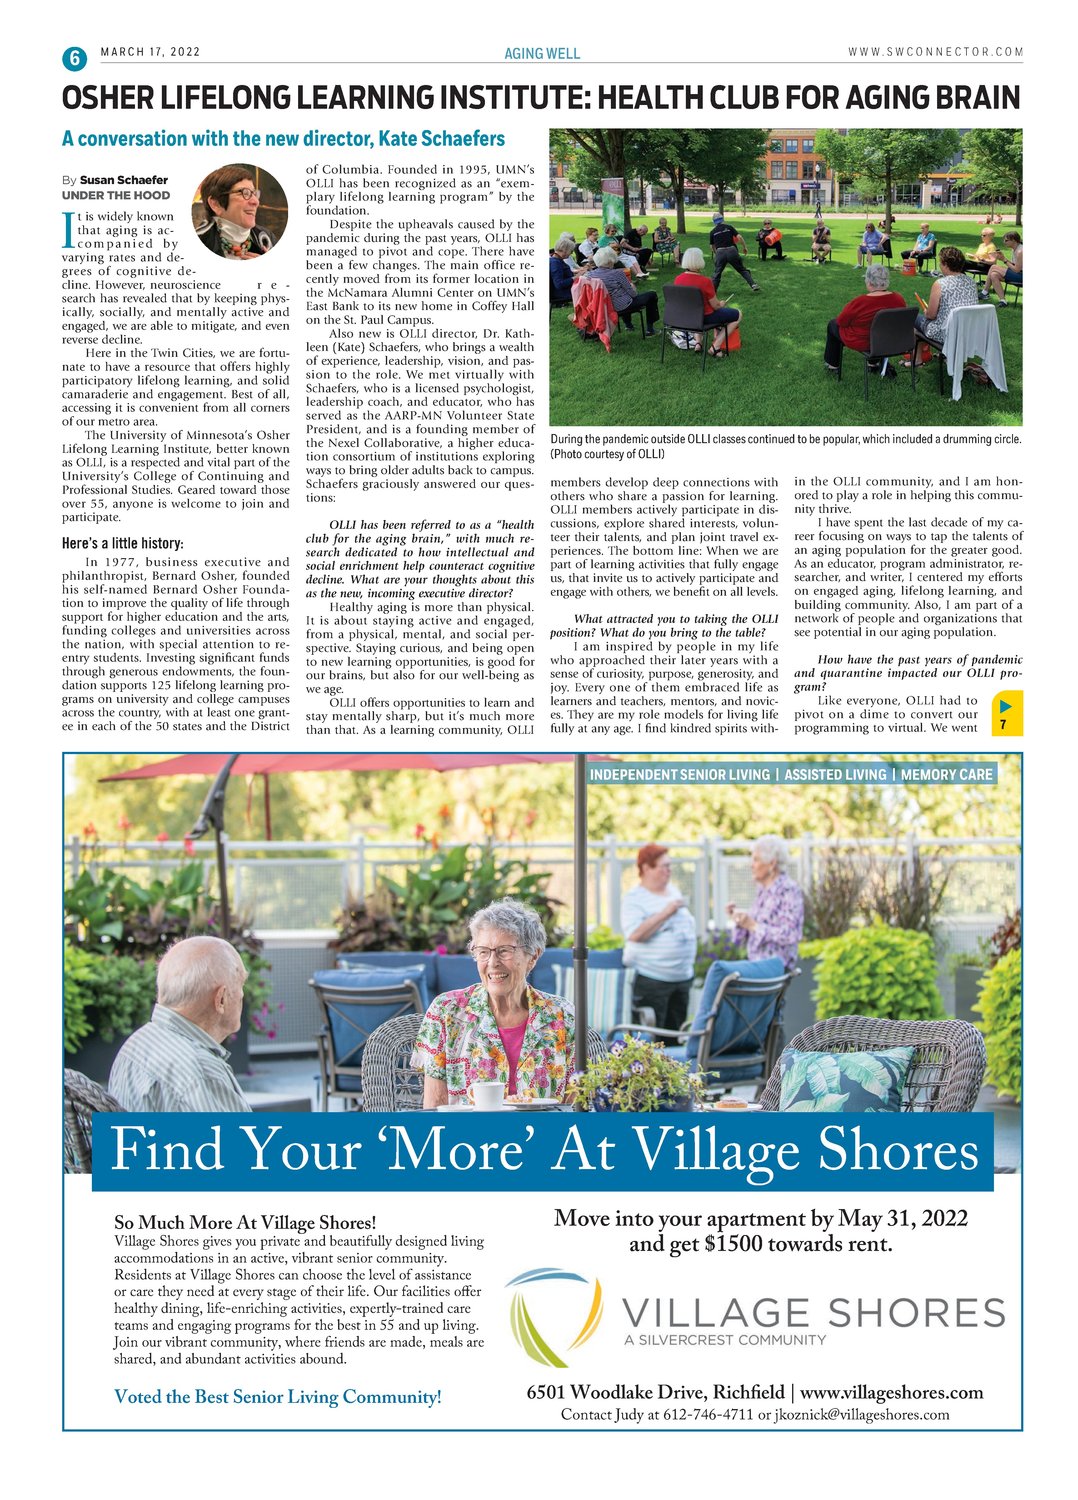 First Place, Best Advertisement -  Sandra Mikulsky and Tesha M. Christensen, “Village Shores,” Southwest Connector. Judge’s comment: Winner has the best balance, use of white space, accurate photo (doesn’t look like stock image, even if it is) and large text to grab the eye